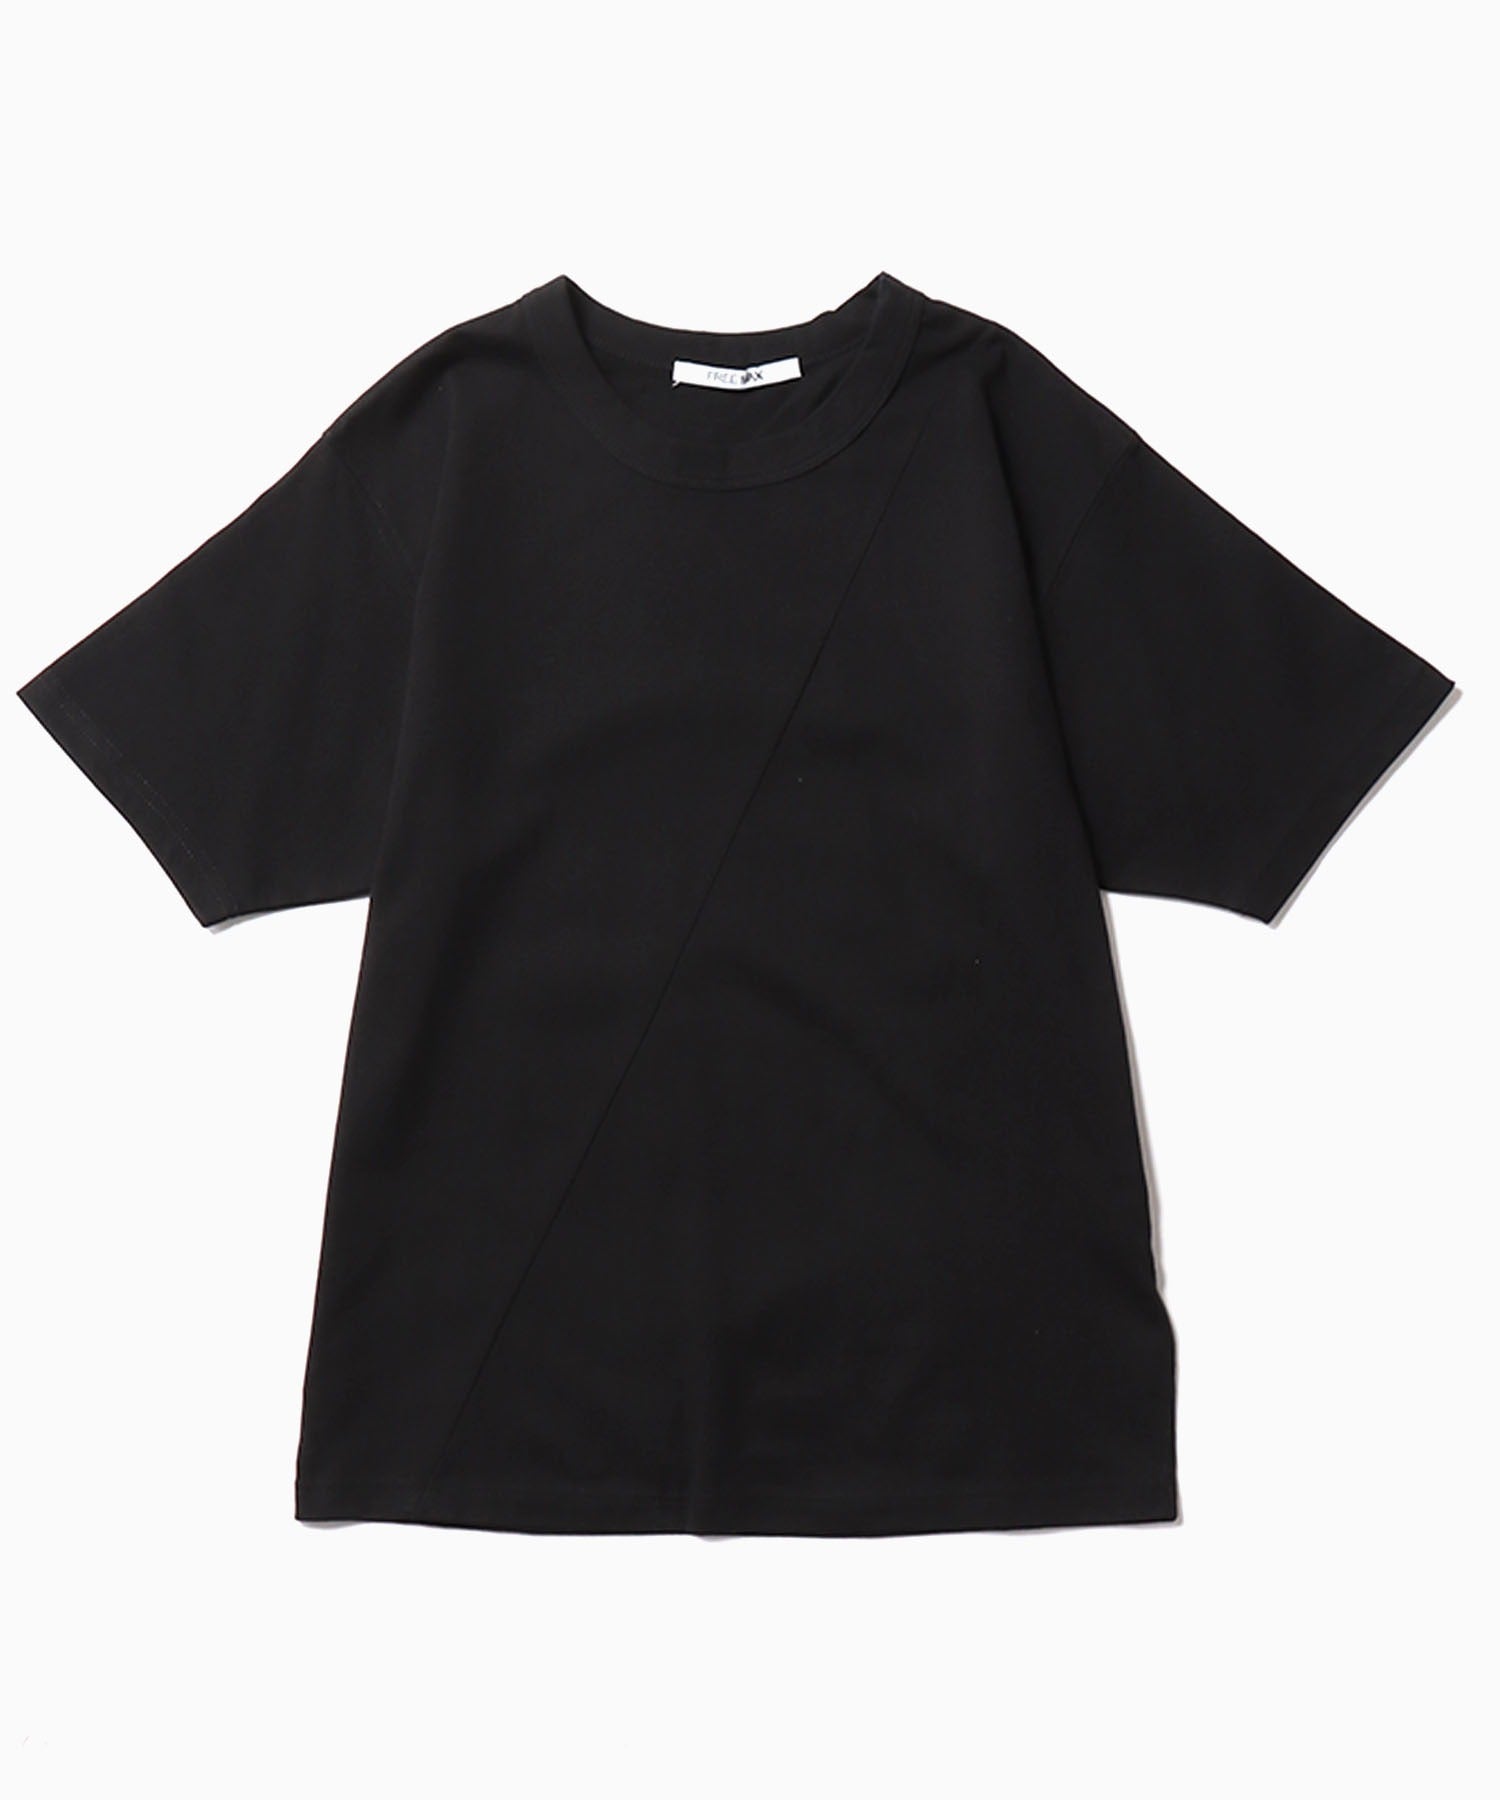 FREE MAX×Hyoma Switching SS Tee